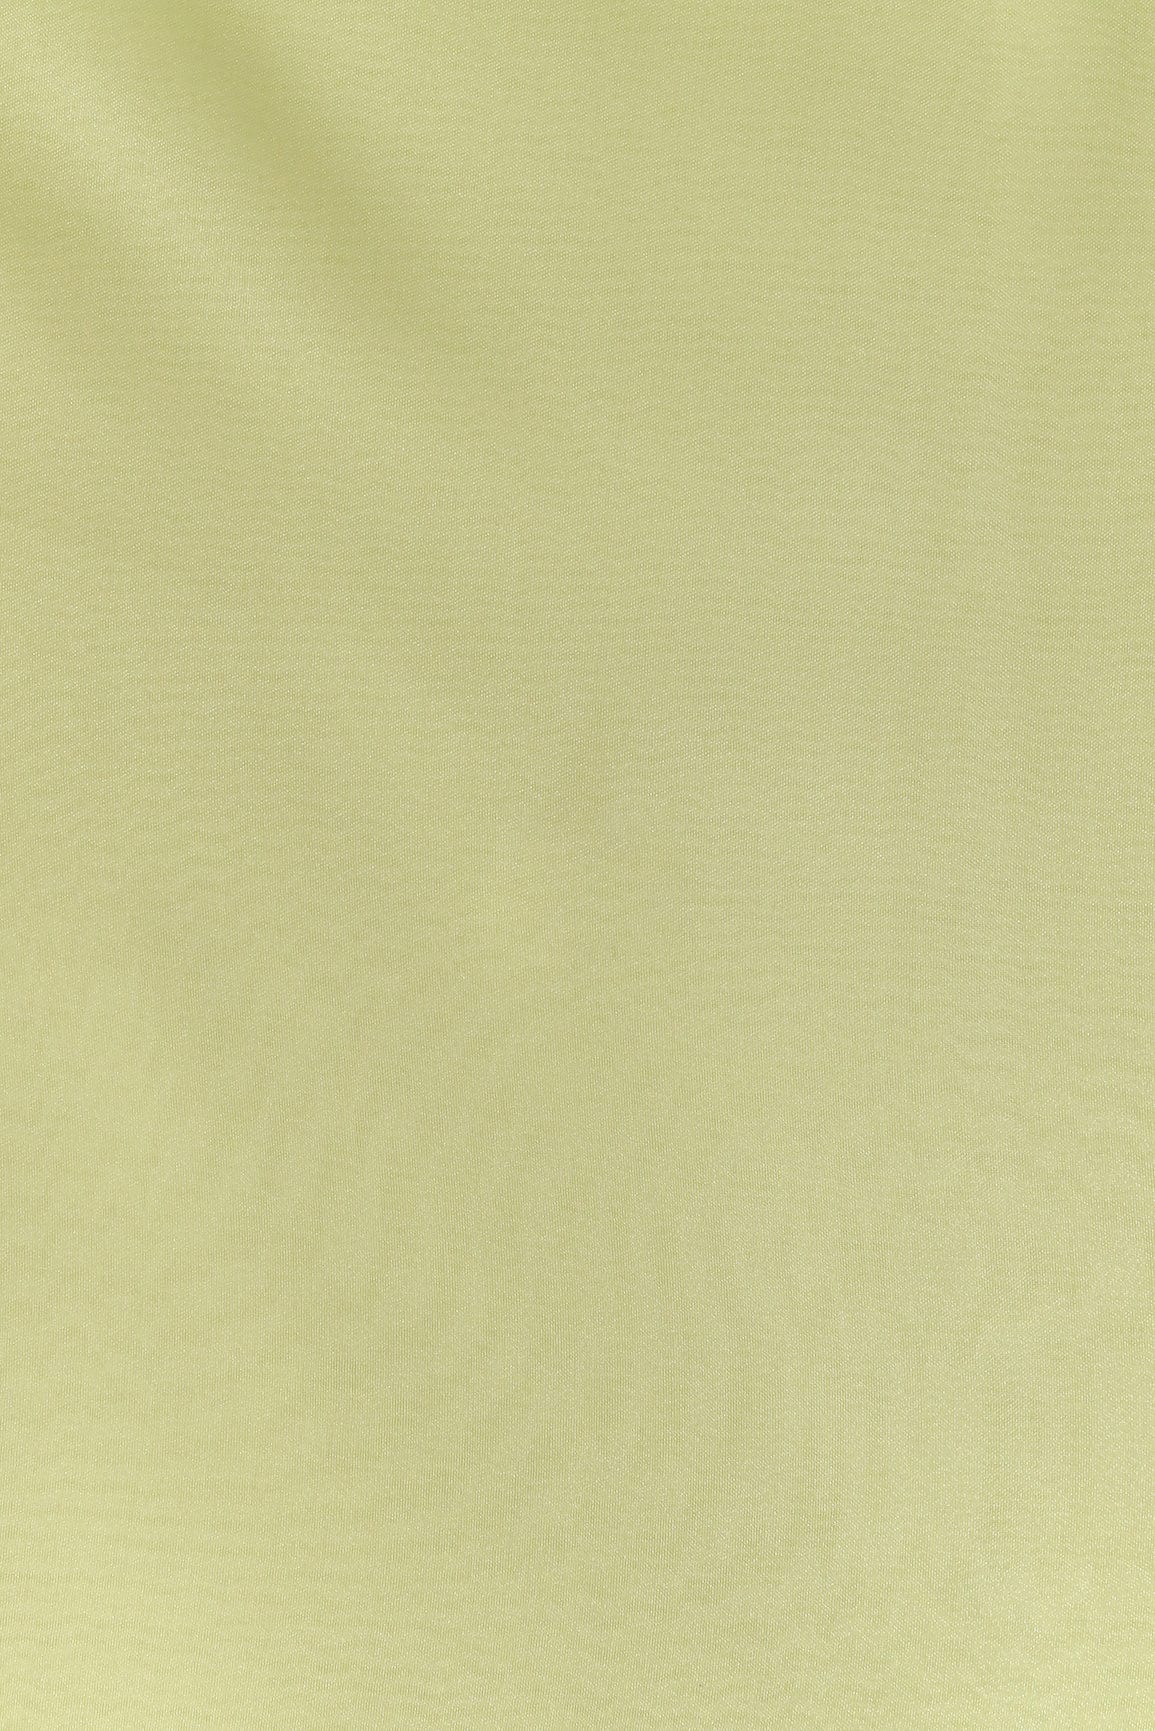 doeraa Plain Dyed Fabrics Butter Yellow Dyed Tissue Fabric